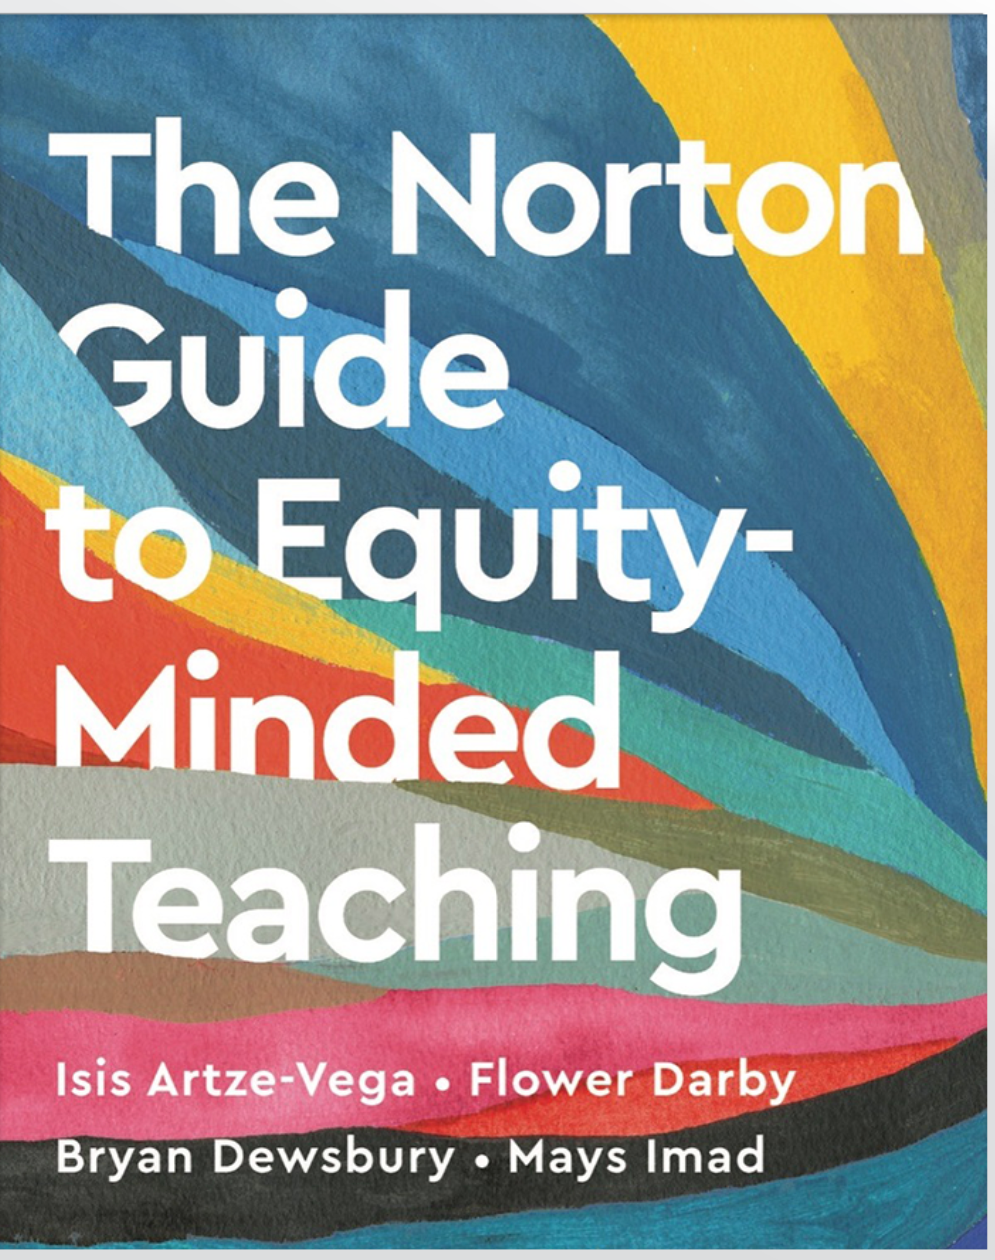 book jacket for the norton-guide 